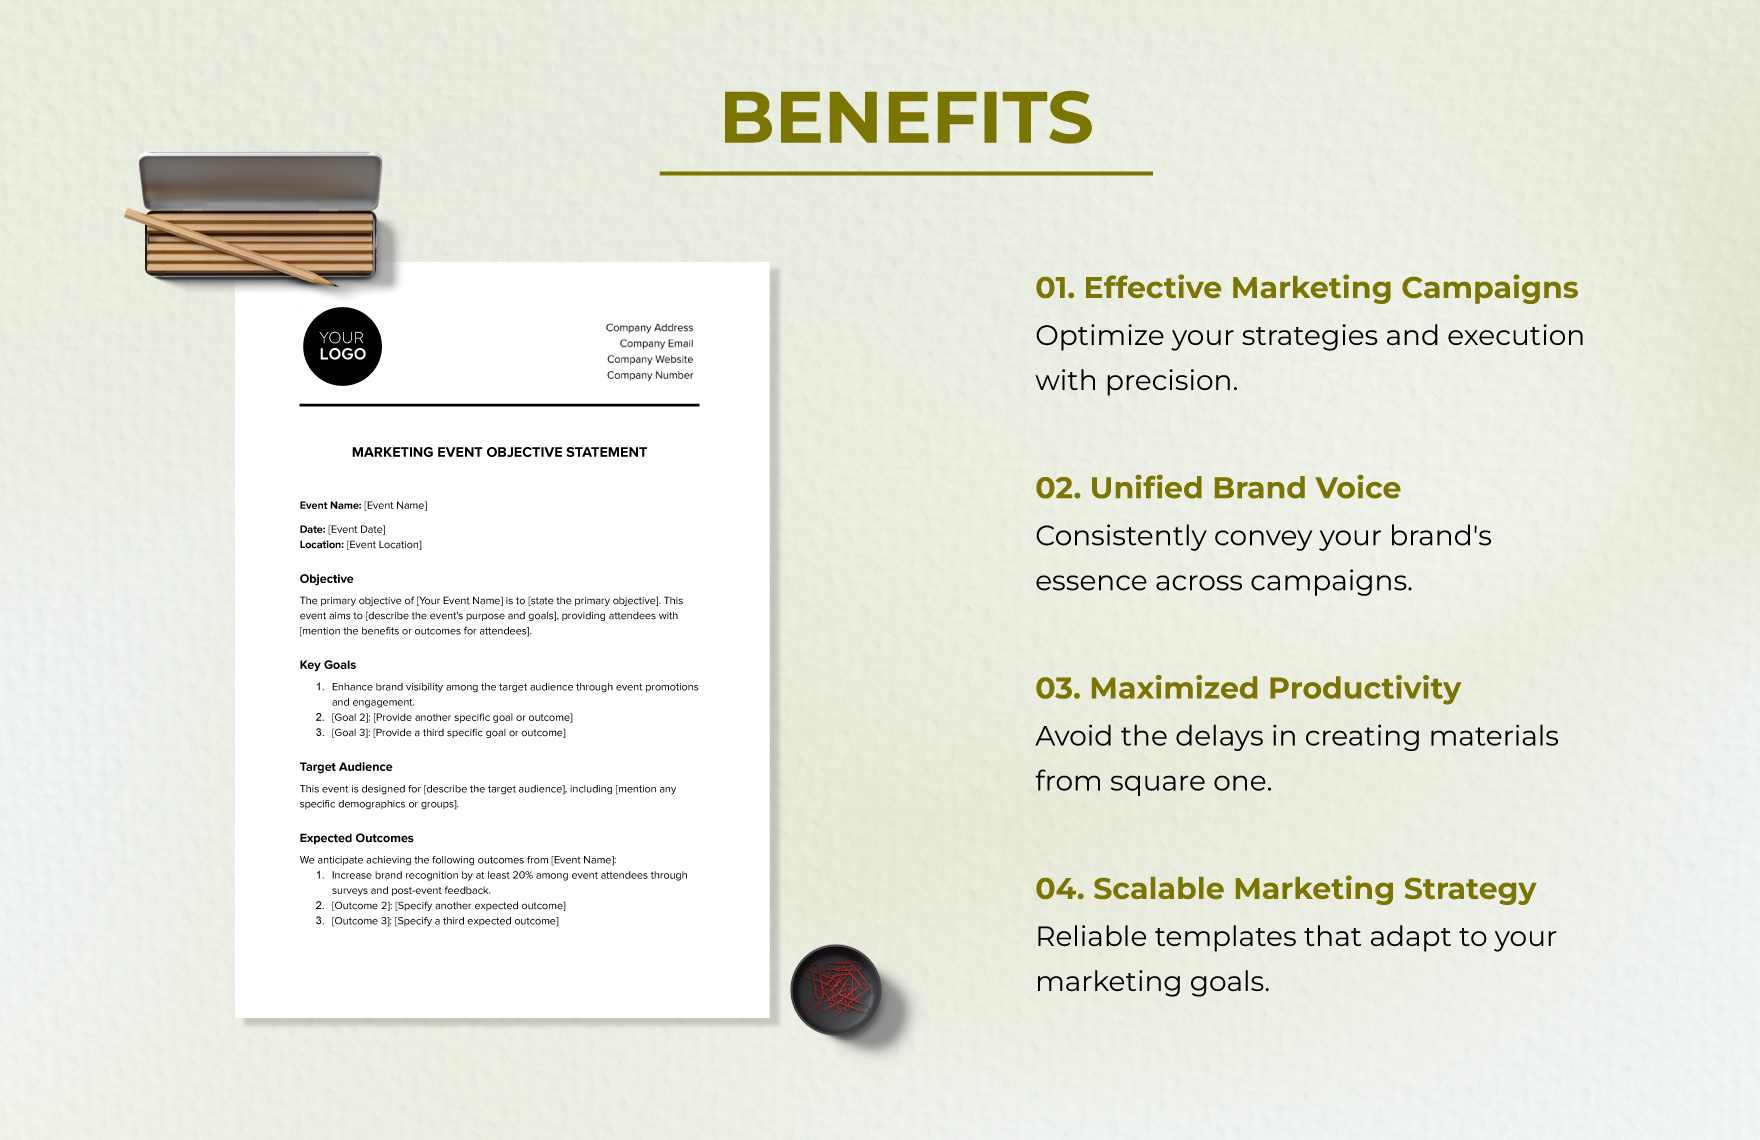 Marketing Event Objective Statement Template